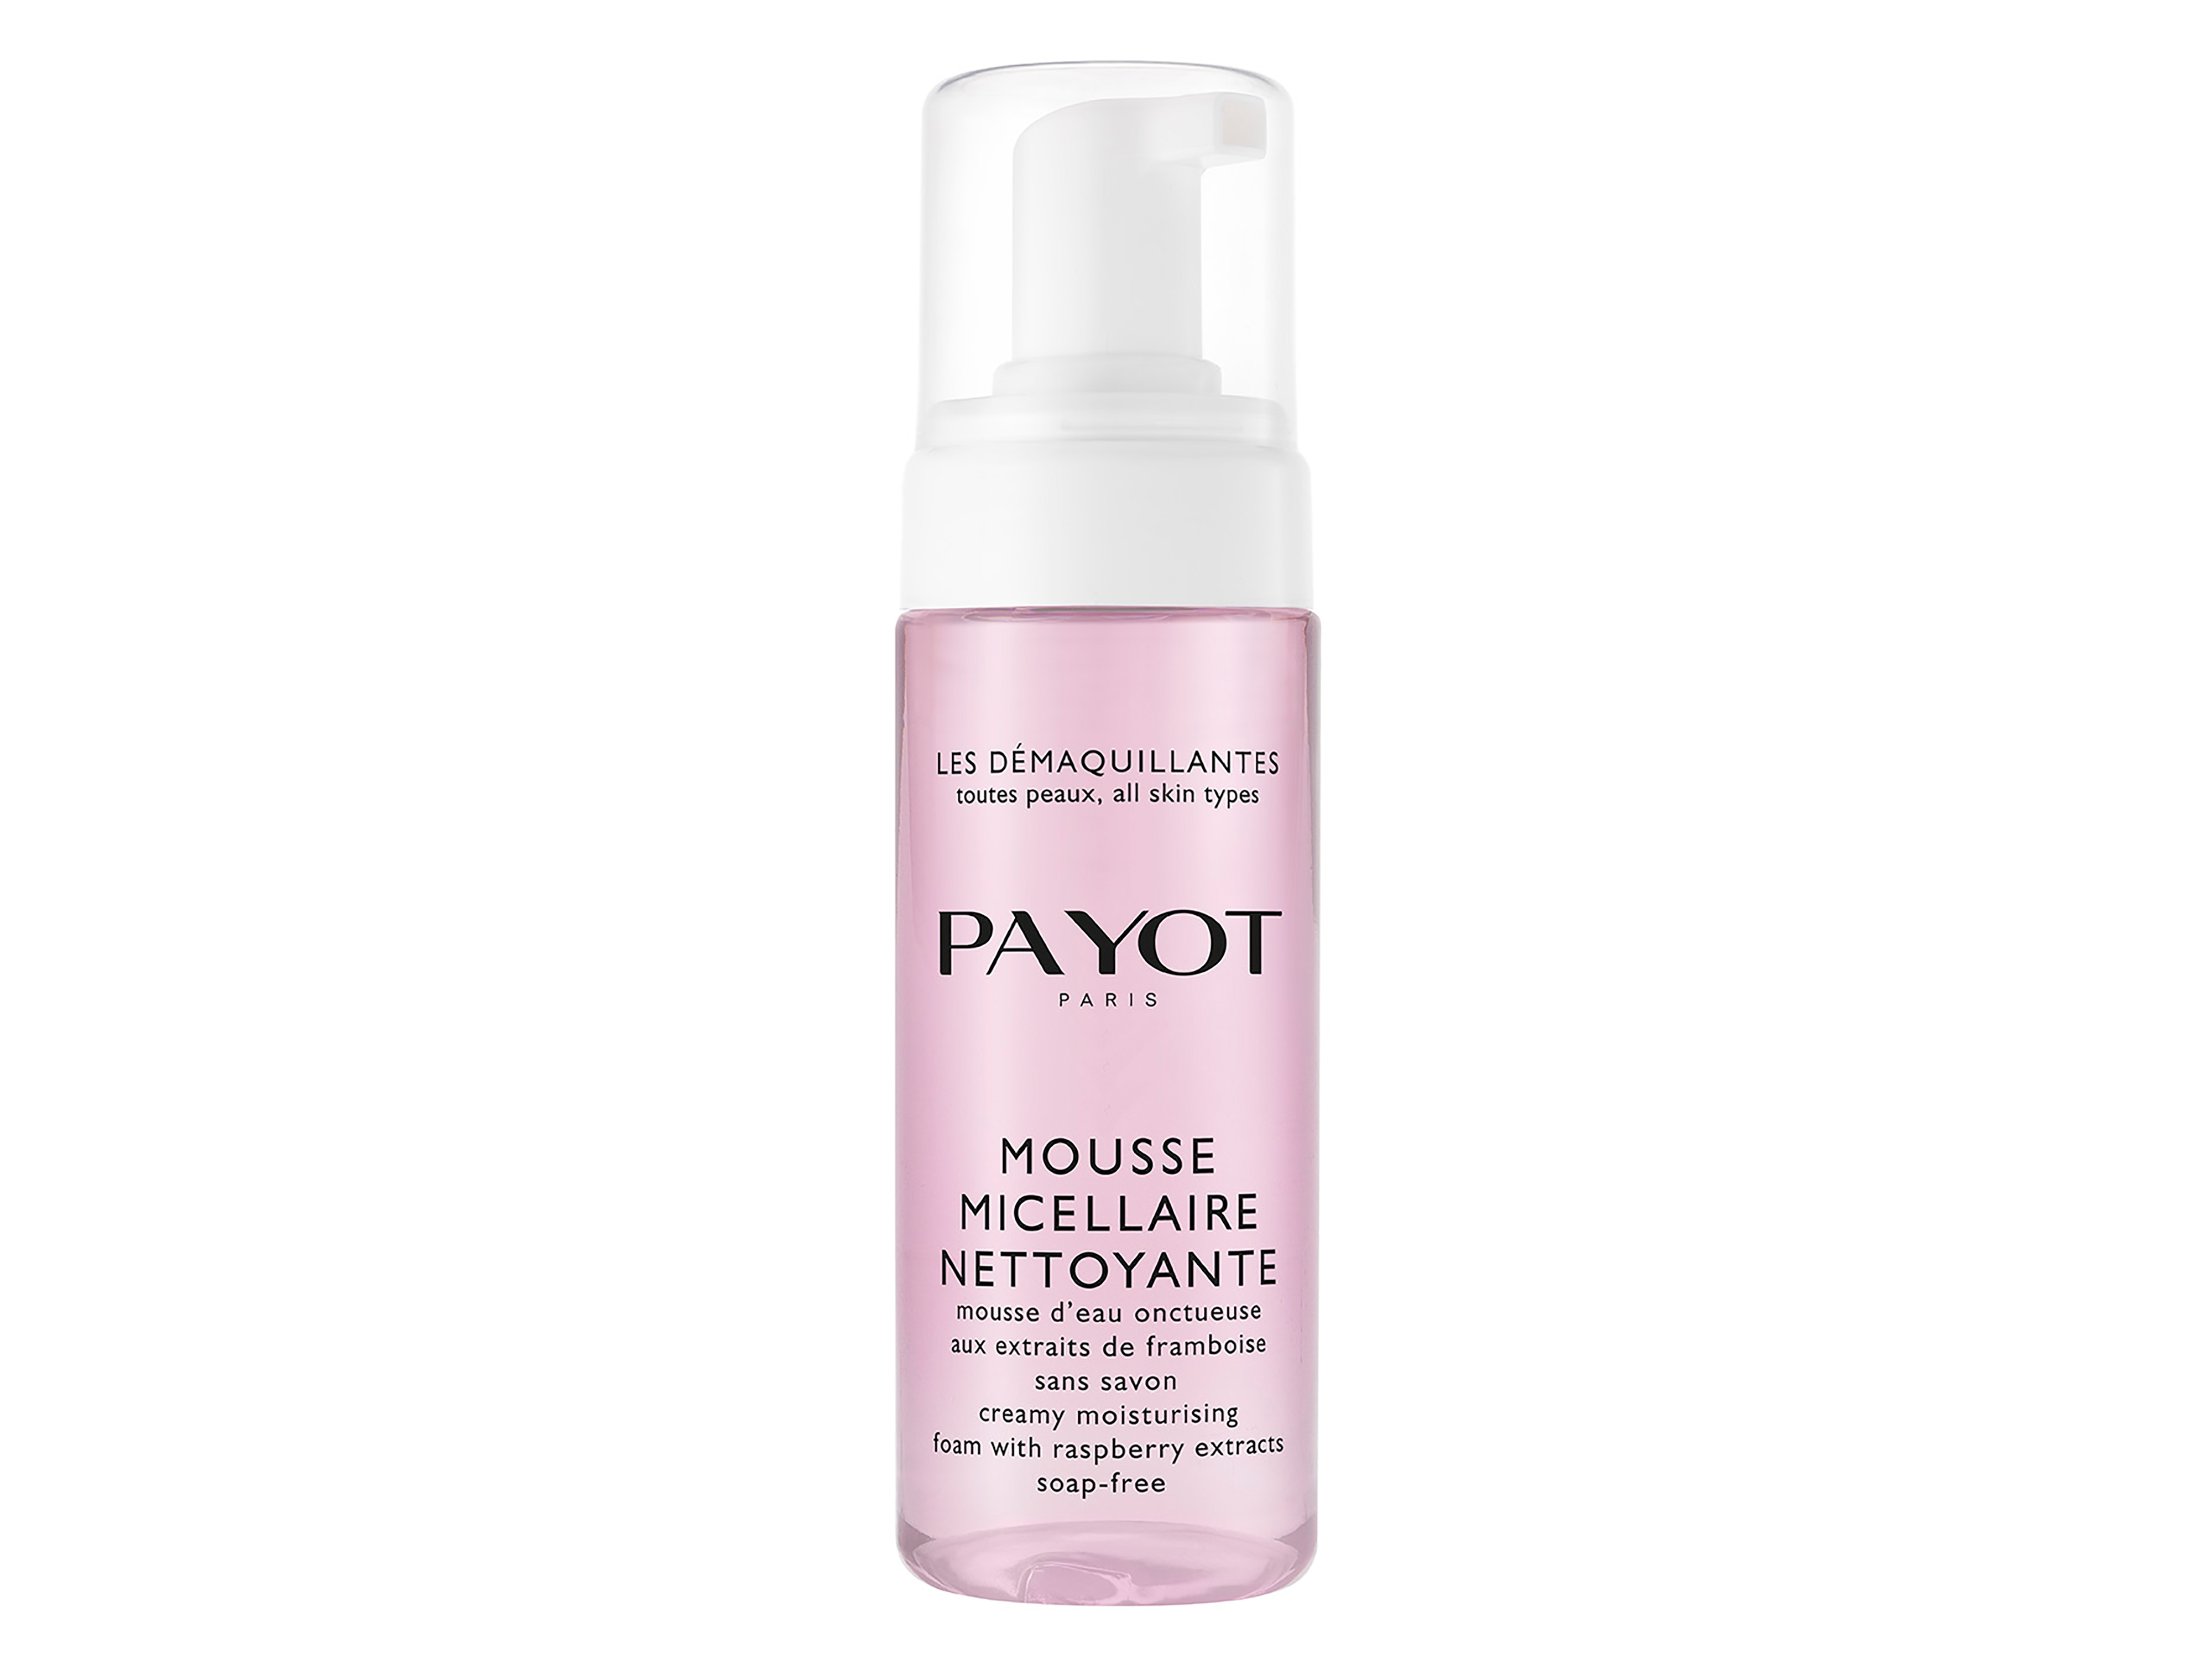 Payot Mousse Micellaire Nettoyante, 150 ml